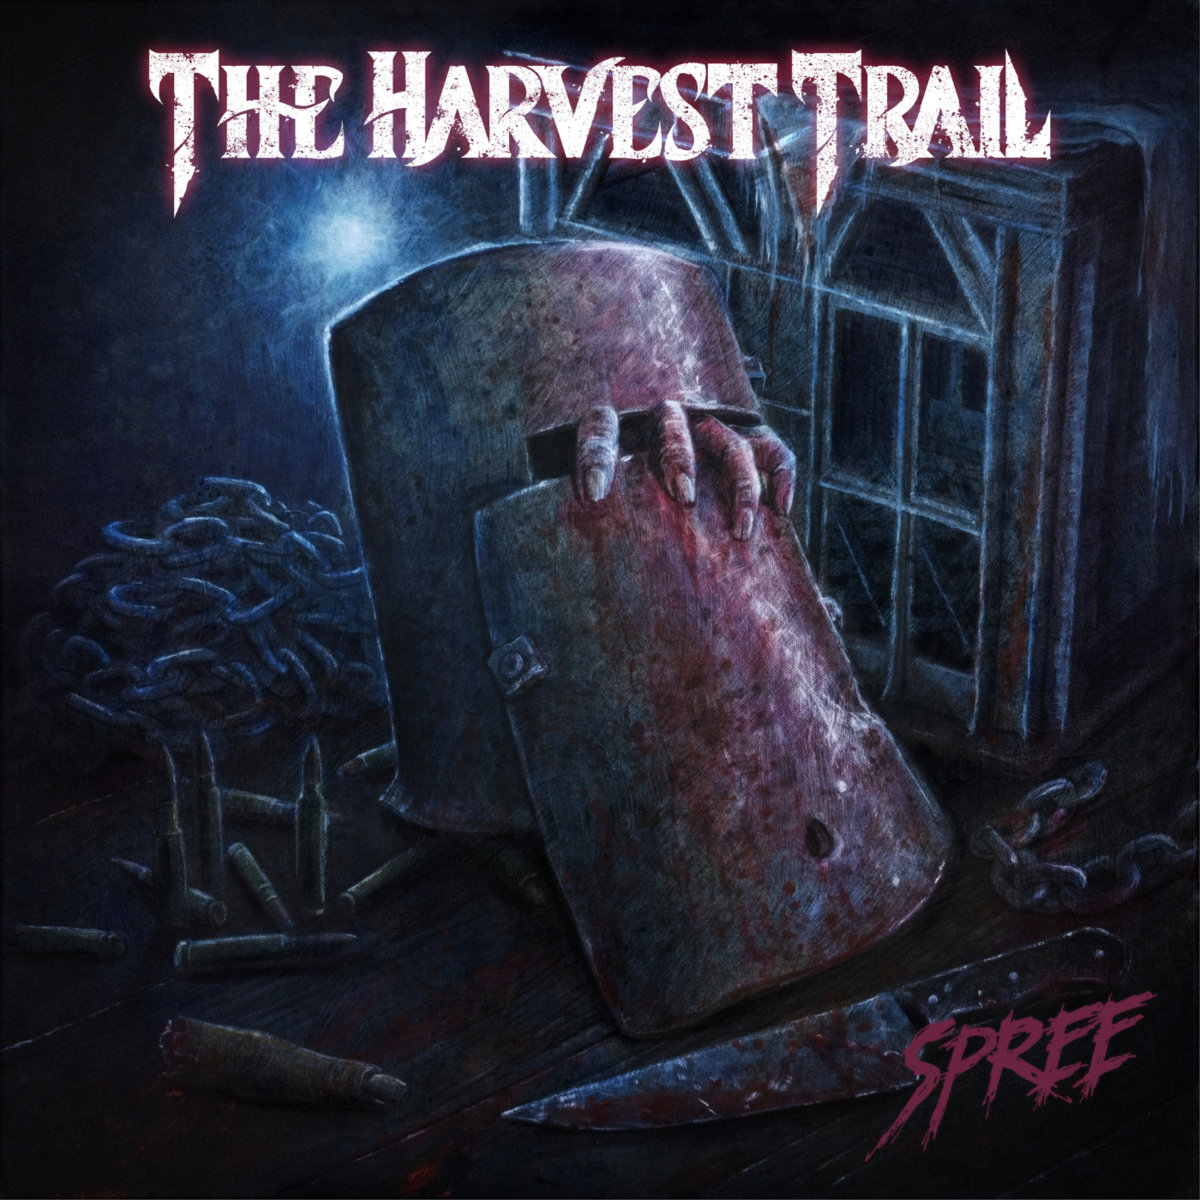 The Harvest Trail - "Spree" EP - 2023